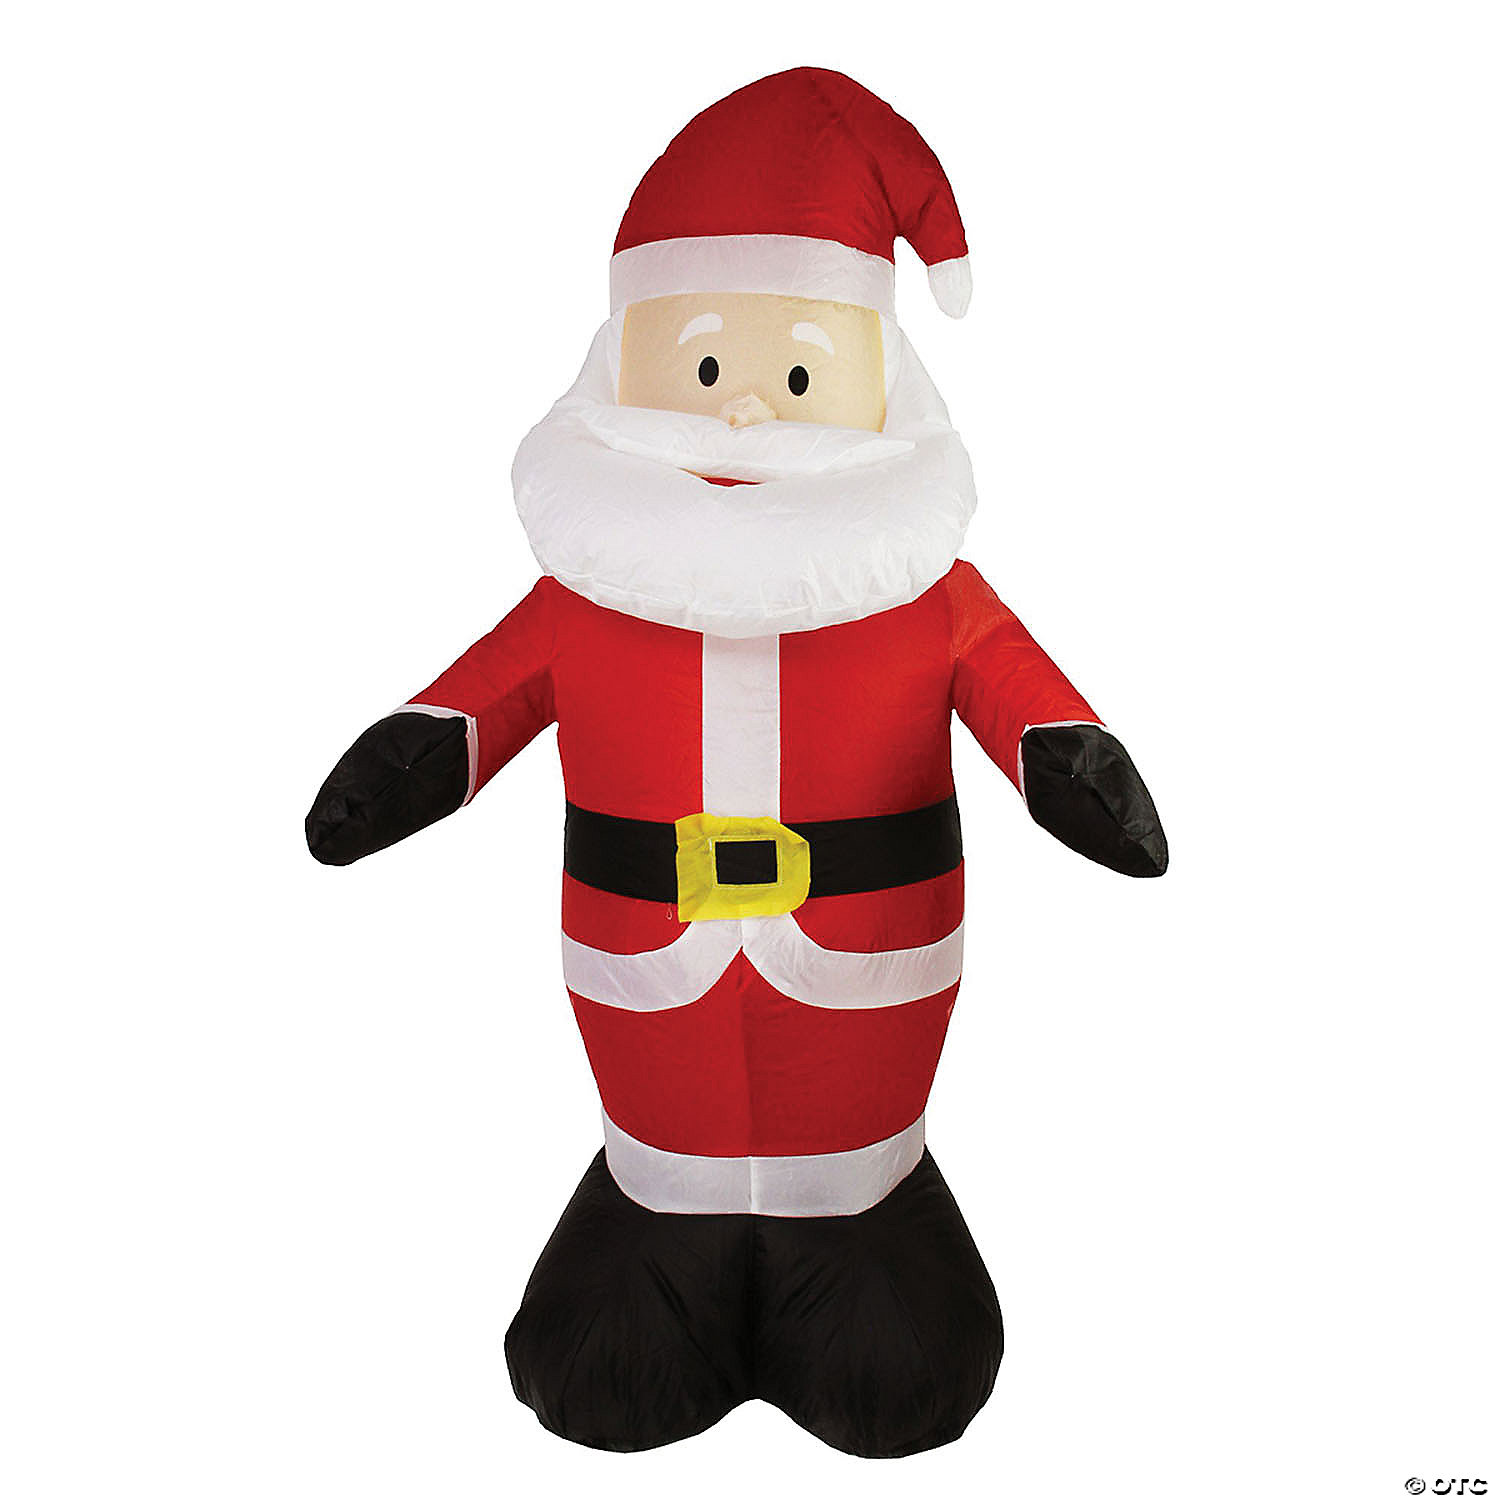 Christmas Inflatable 5 Feet Christmas Santa Claus LED Lights Air Decoration Statue Waving Hand and Holding Gift Box Waterproof Landscape Lights for Outdoor Indoor Use Yard Lawn Garden